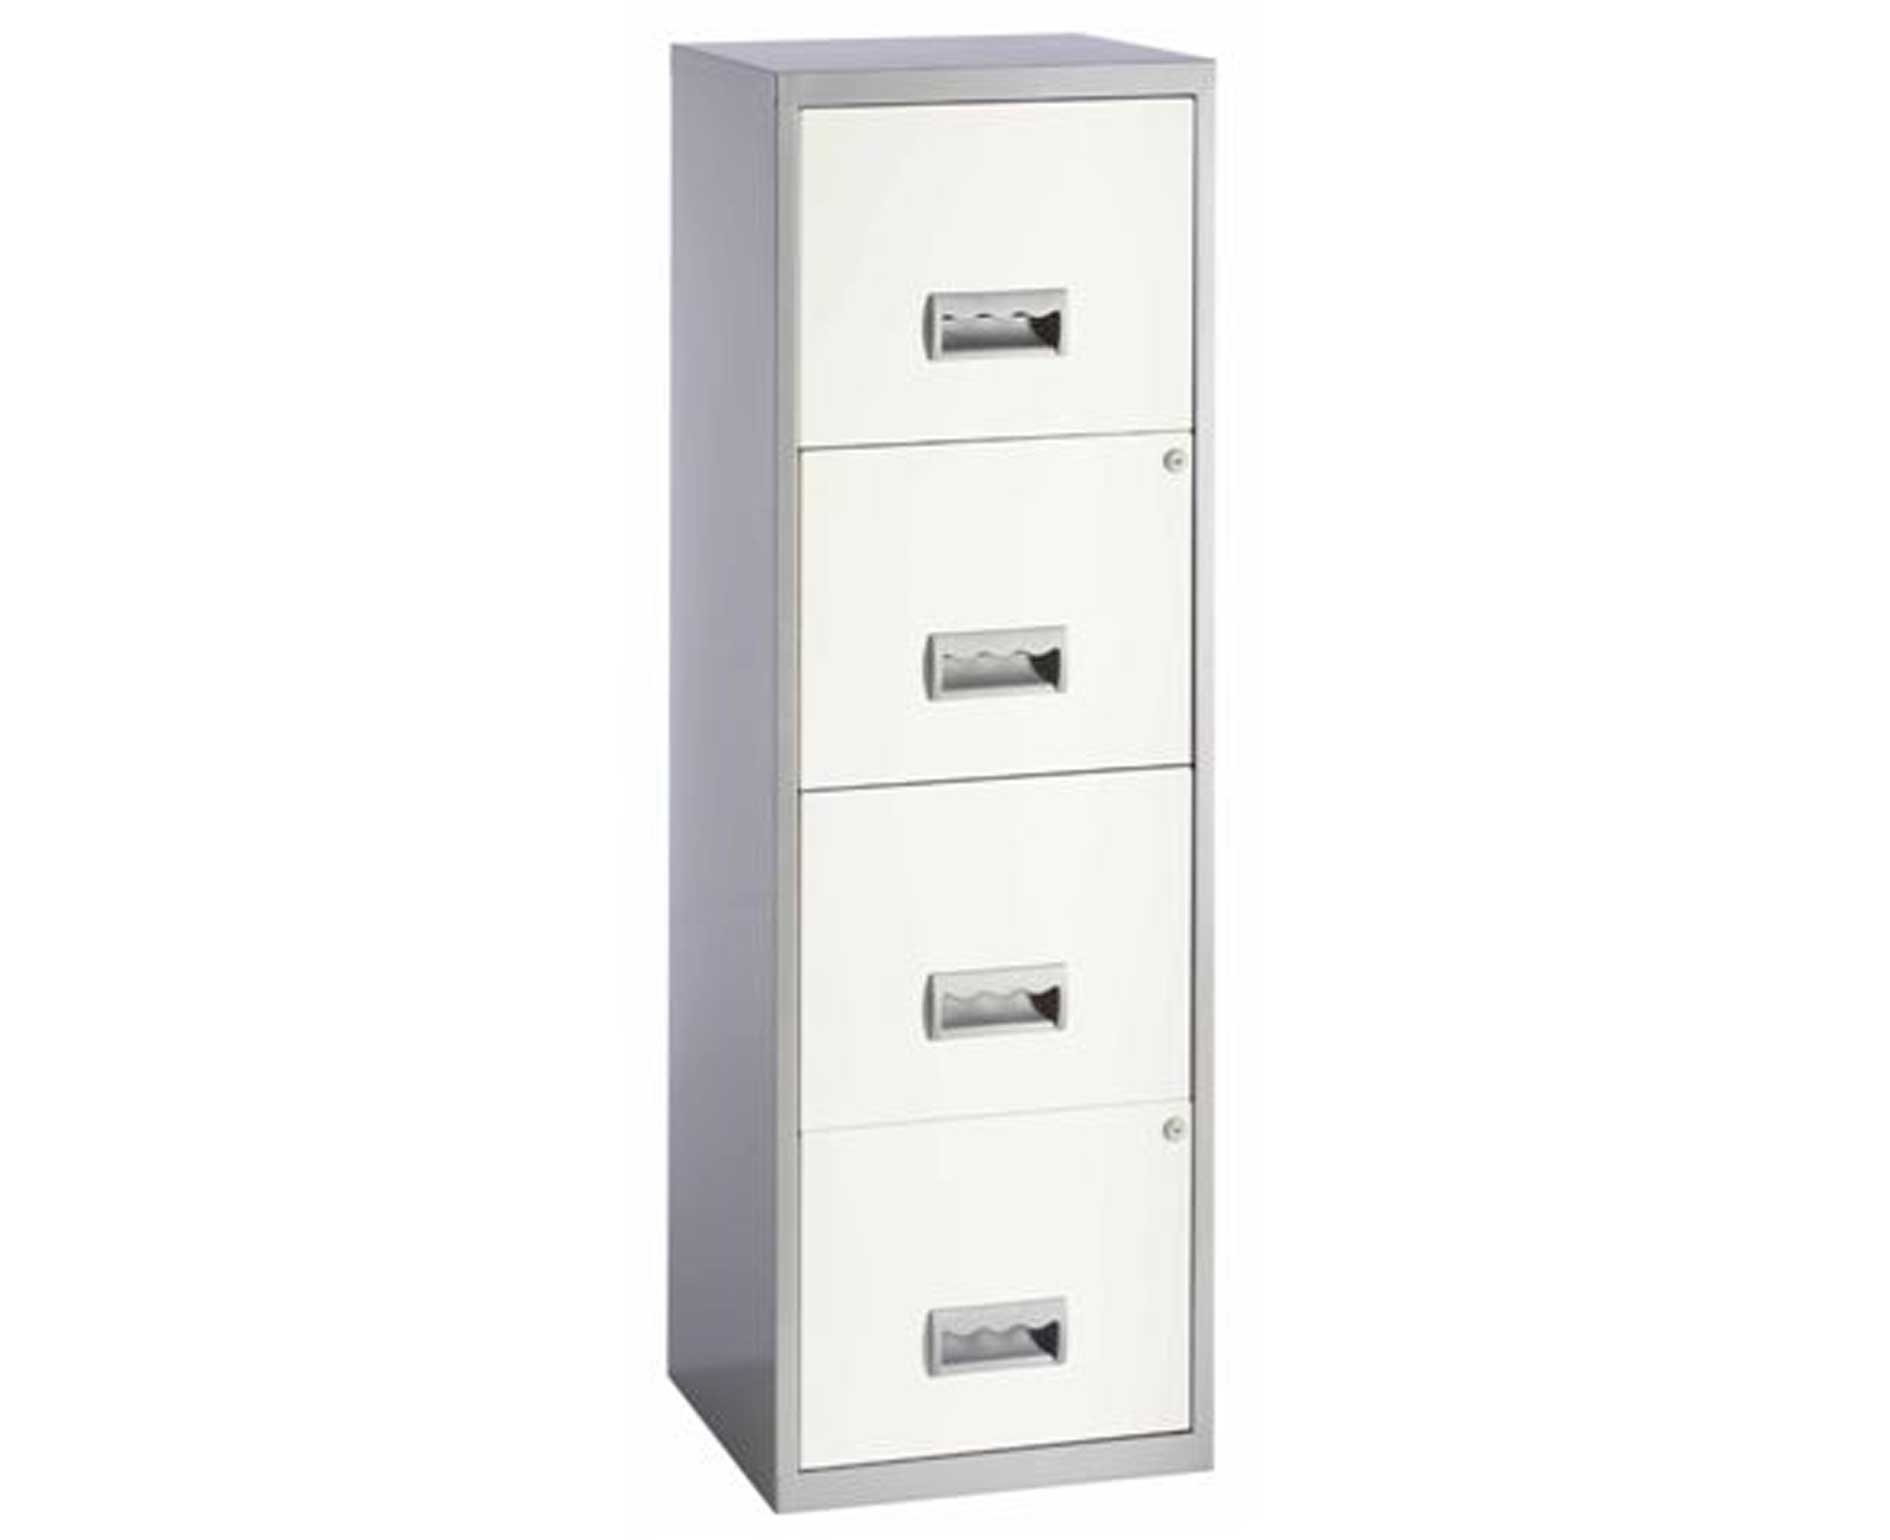 Pierre Henry Filing Cabinets Storage Shelving Furniture Storage in dimensions 1890 X 1540